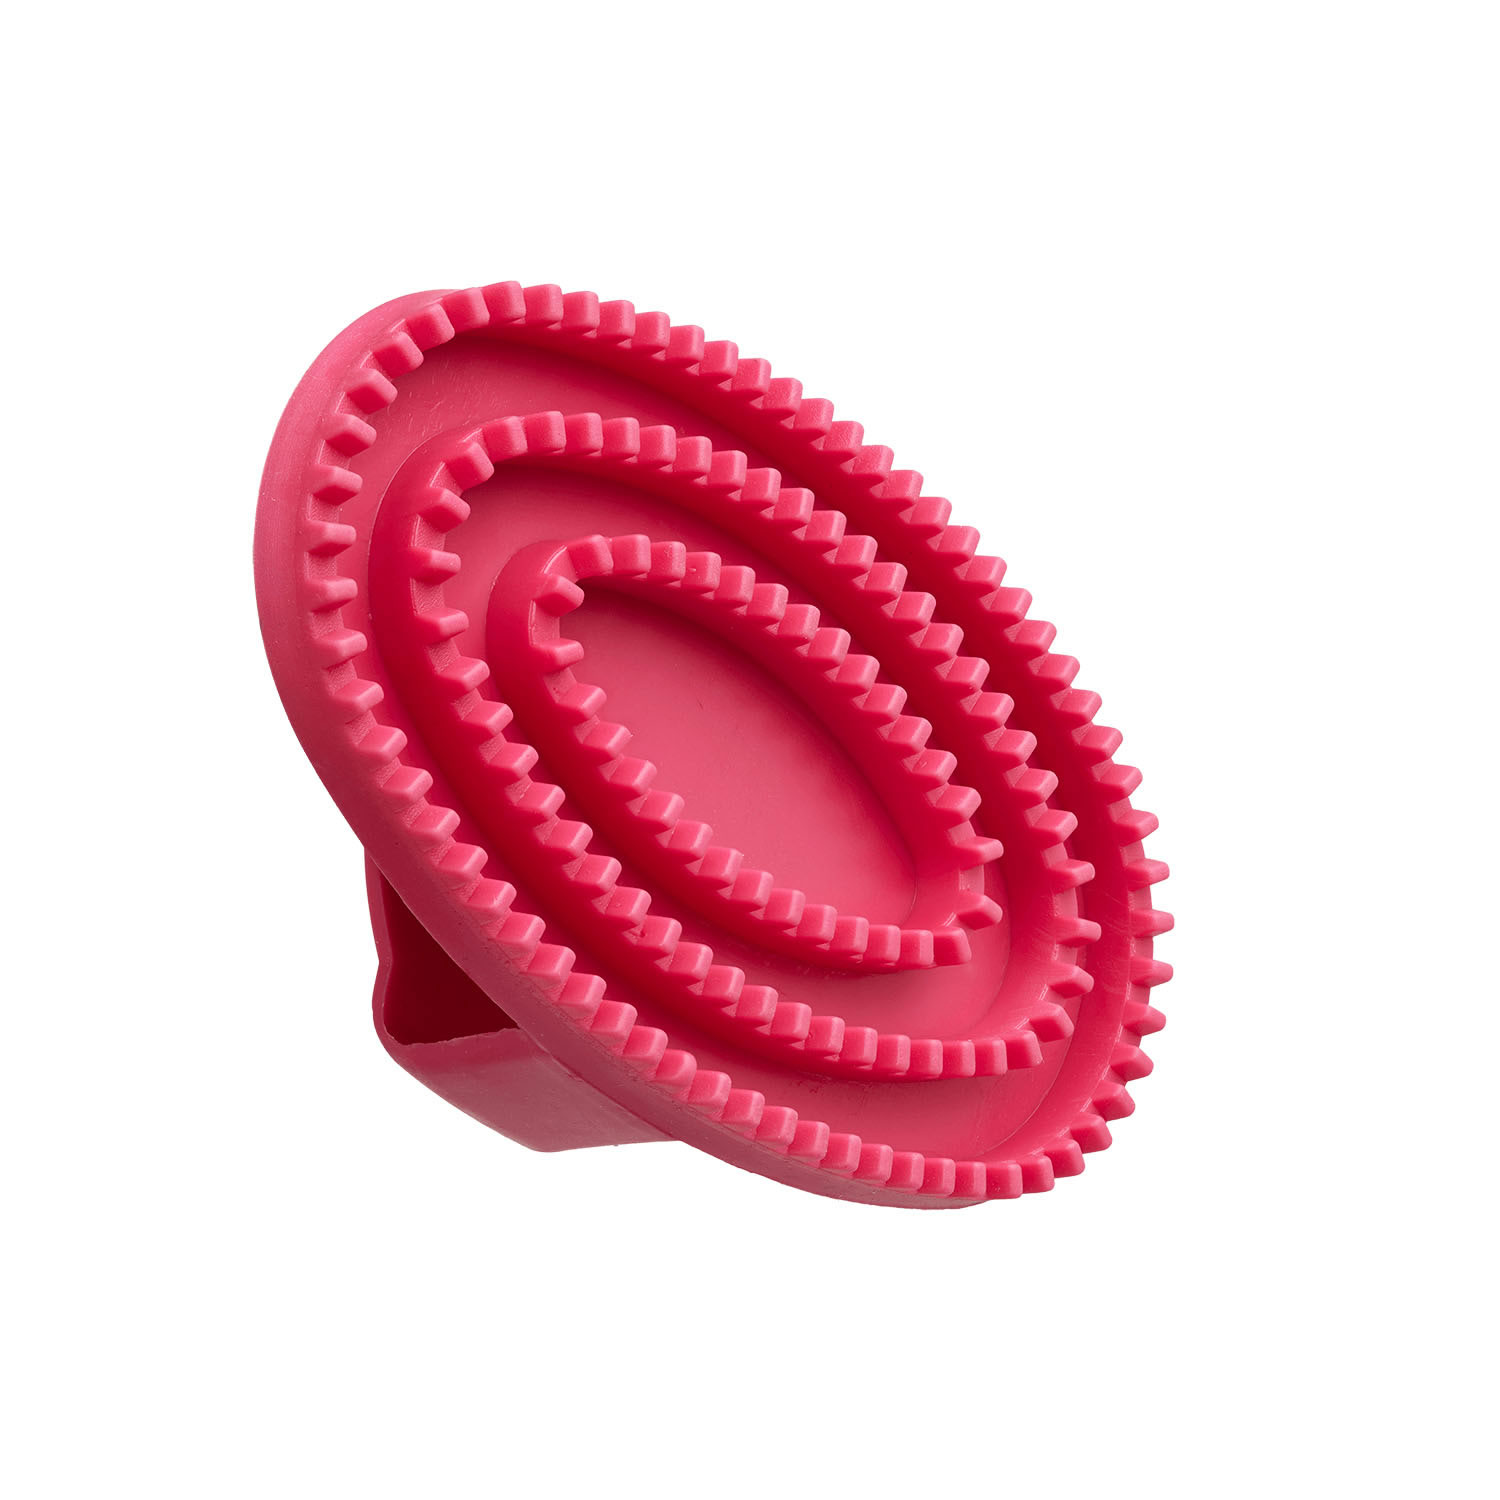 BITZ CURRY COMB RUBBER SMALL PINK SMALL